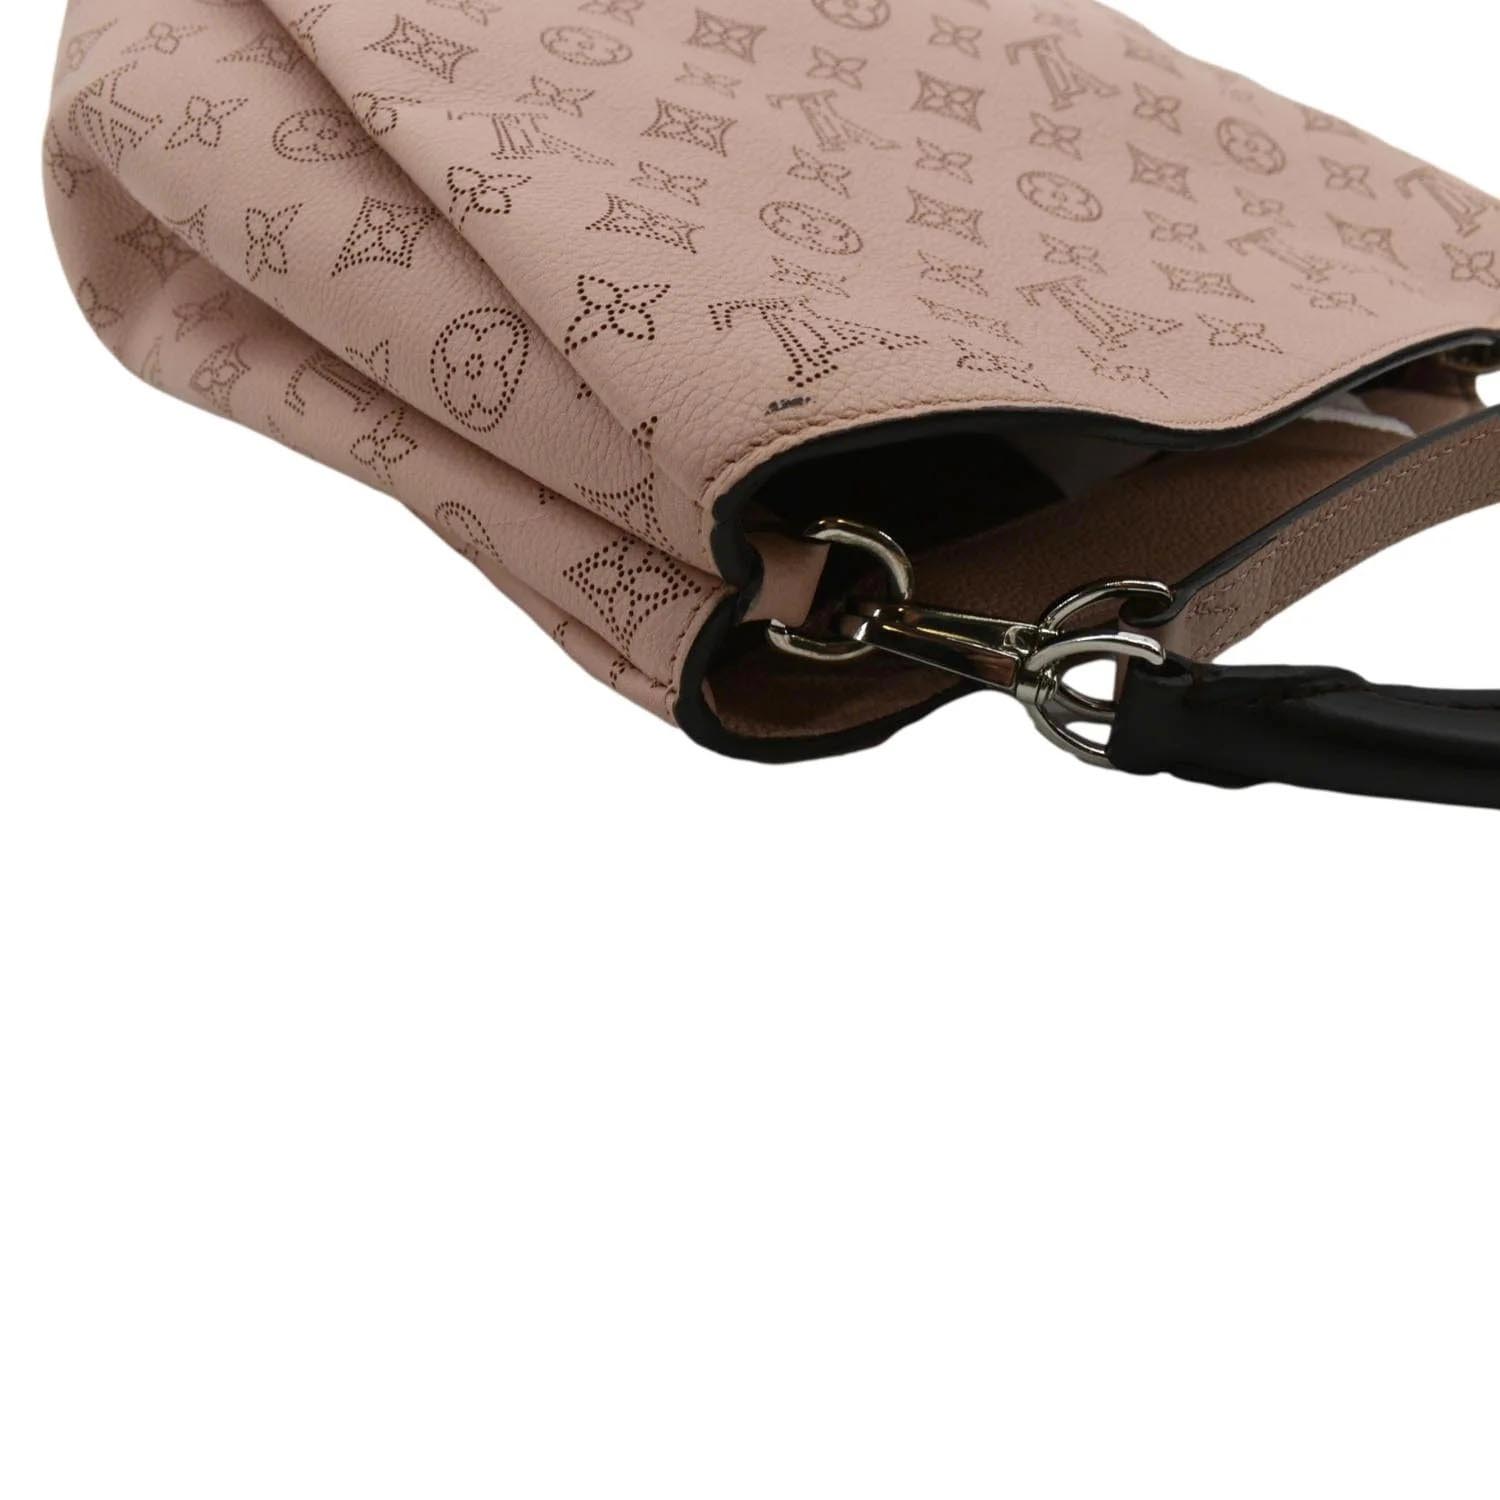 Mahina Babylone Pm bag in pink leather Louis Vuitton - Second Hand